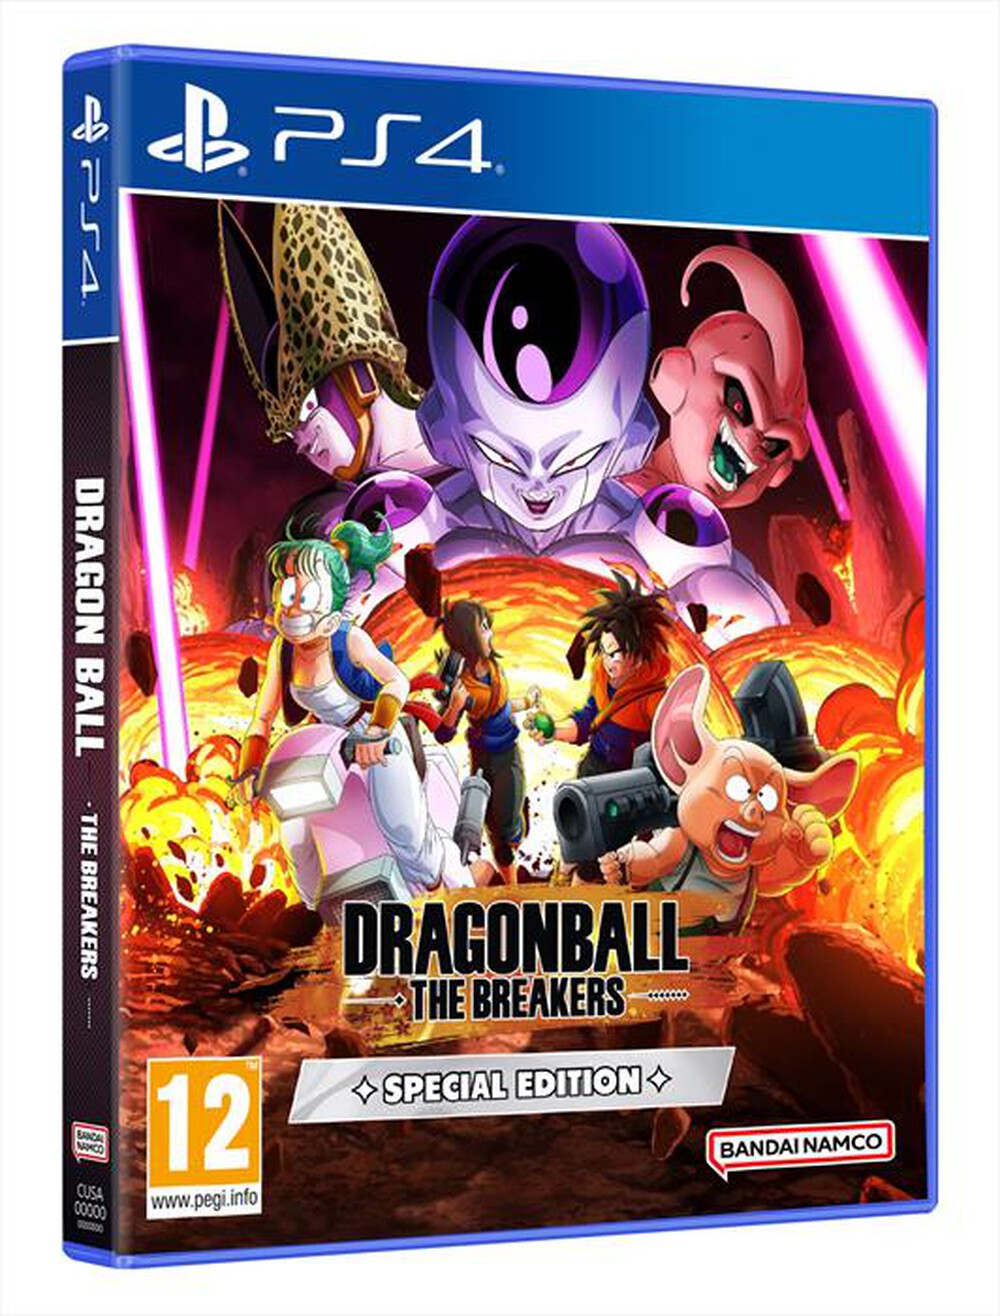 "NAMCO - DRAGON BALL: THE BREAKERS SPECIAL EDITION PS4"